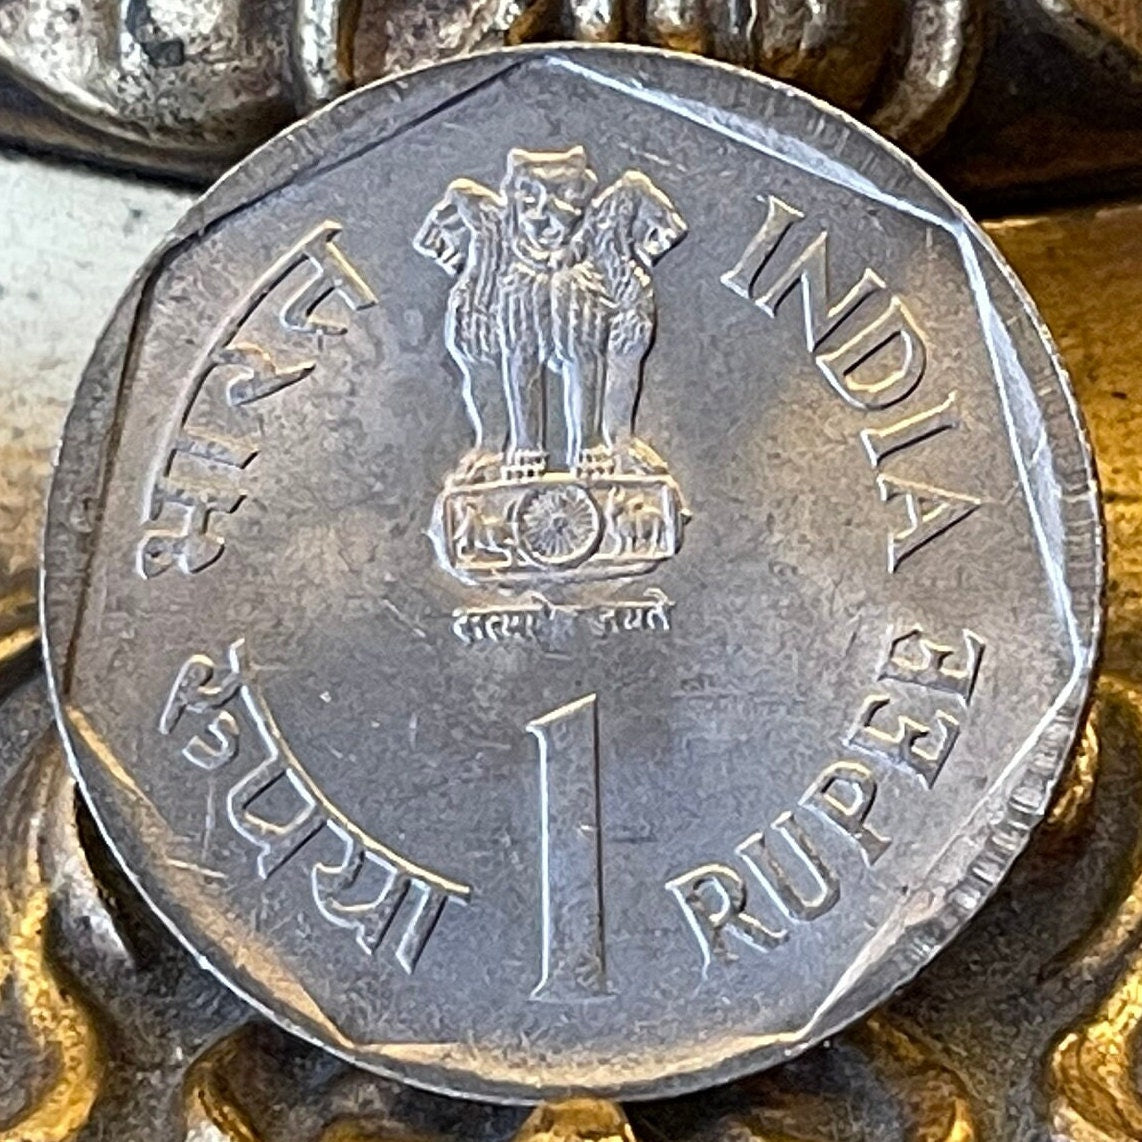 Sunshine Girl & Ashoka Lion Capitol 1 Rupee India Authentic Coin Money for Jewelry and Craft Making (Care for the Girl Child)